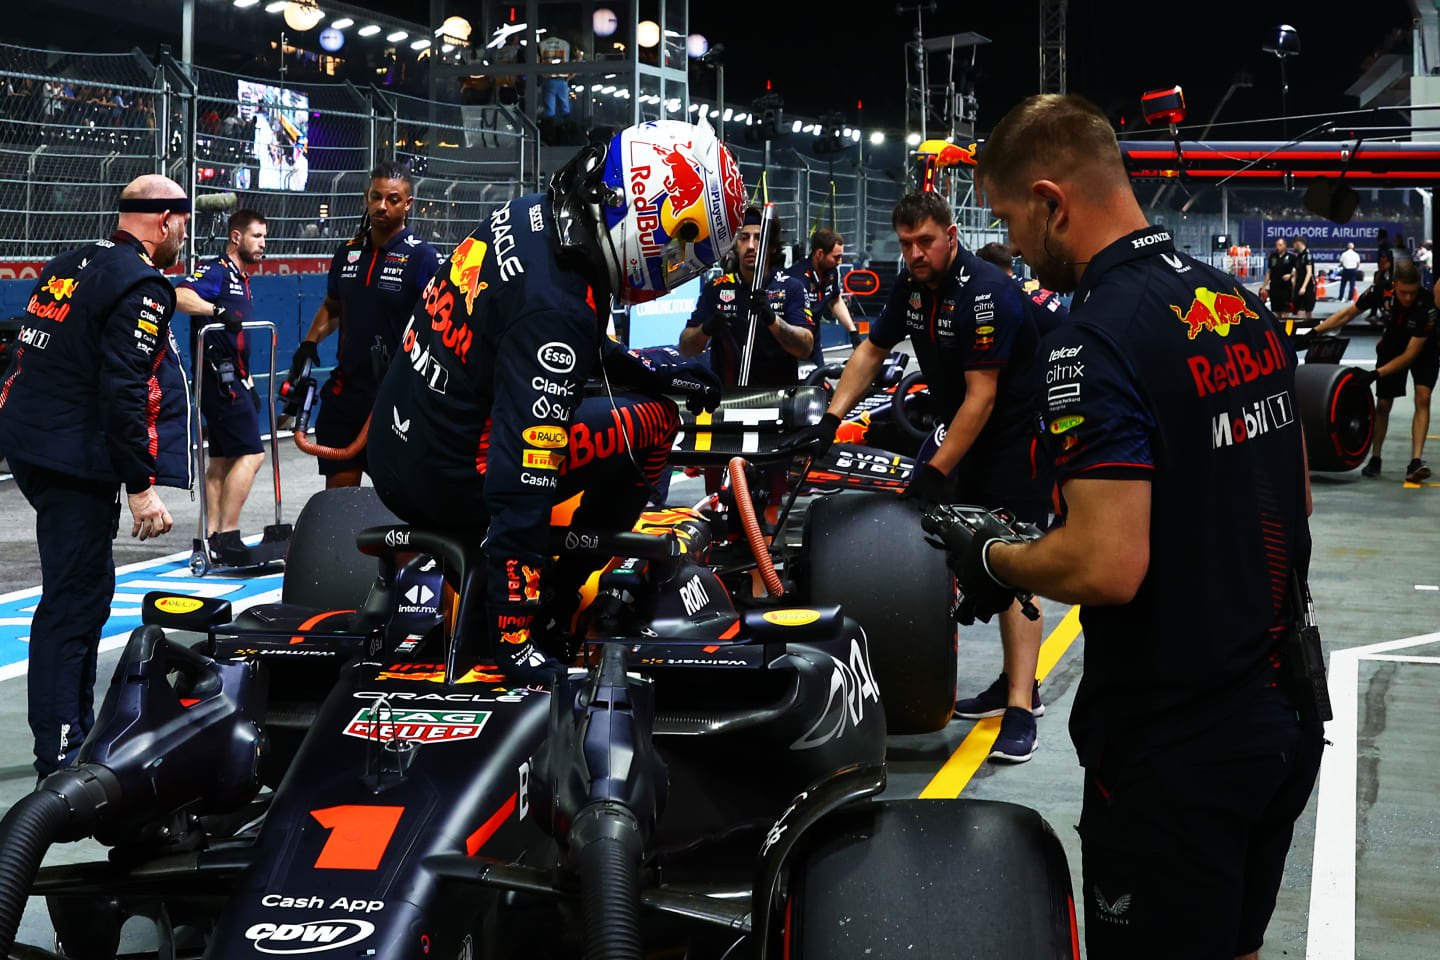 SINGAPORE, SINGAPORE - SEPTEMBER 16: 11th placed qualifier Max Verstappen of the Netherlands and